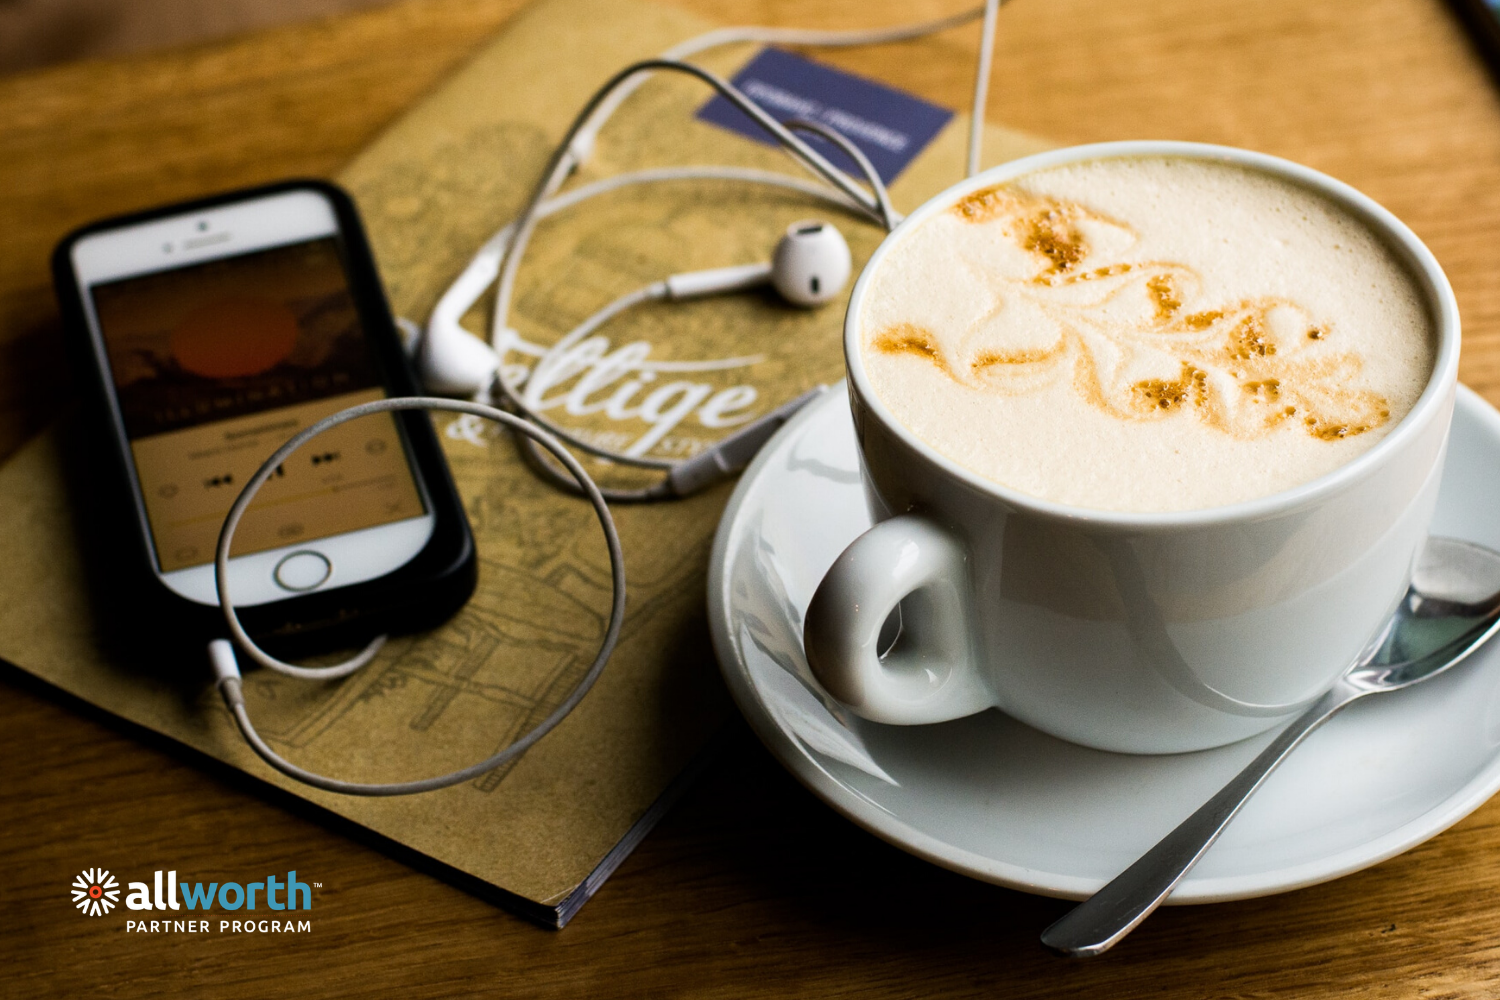 cell phone with headphones plugged in, on a desk next to a warm cappuccino